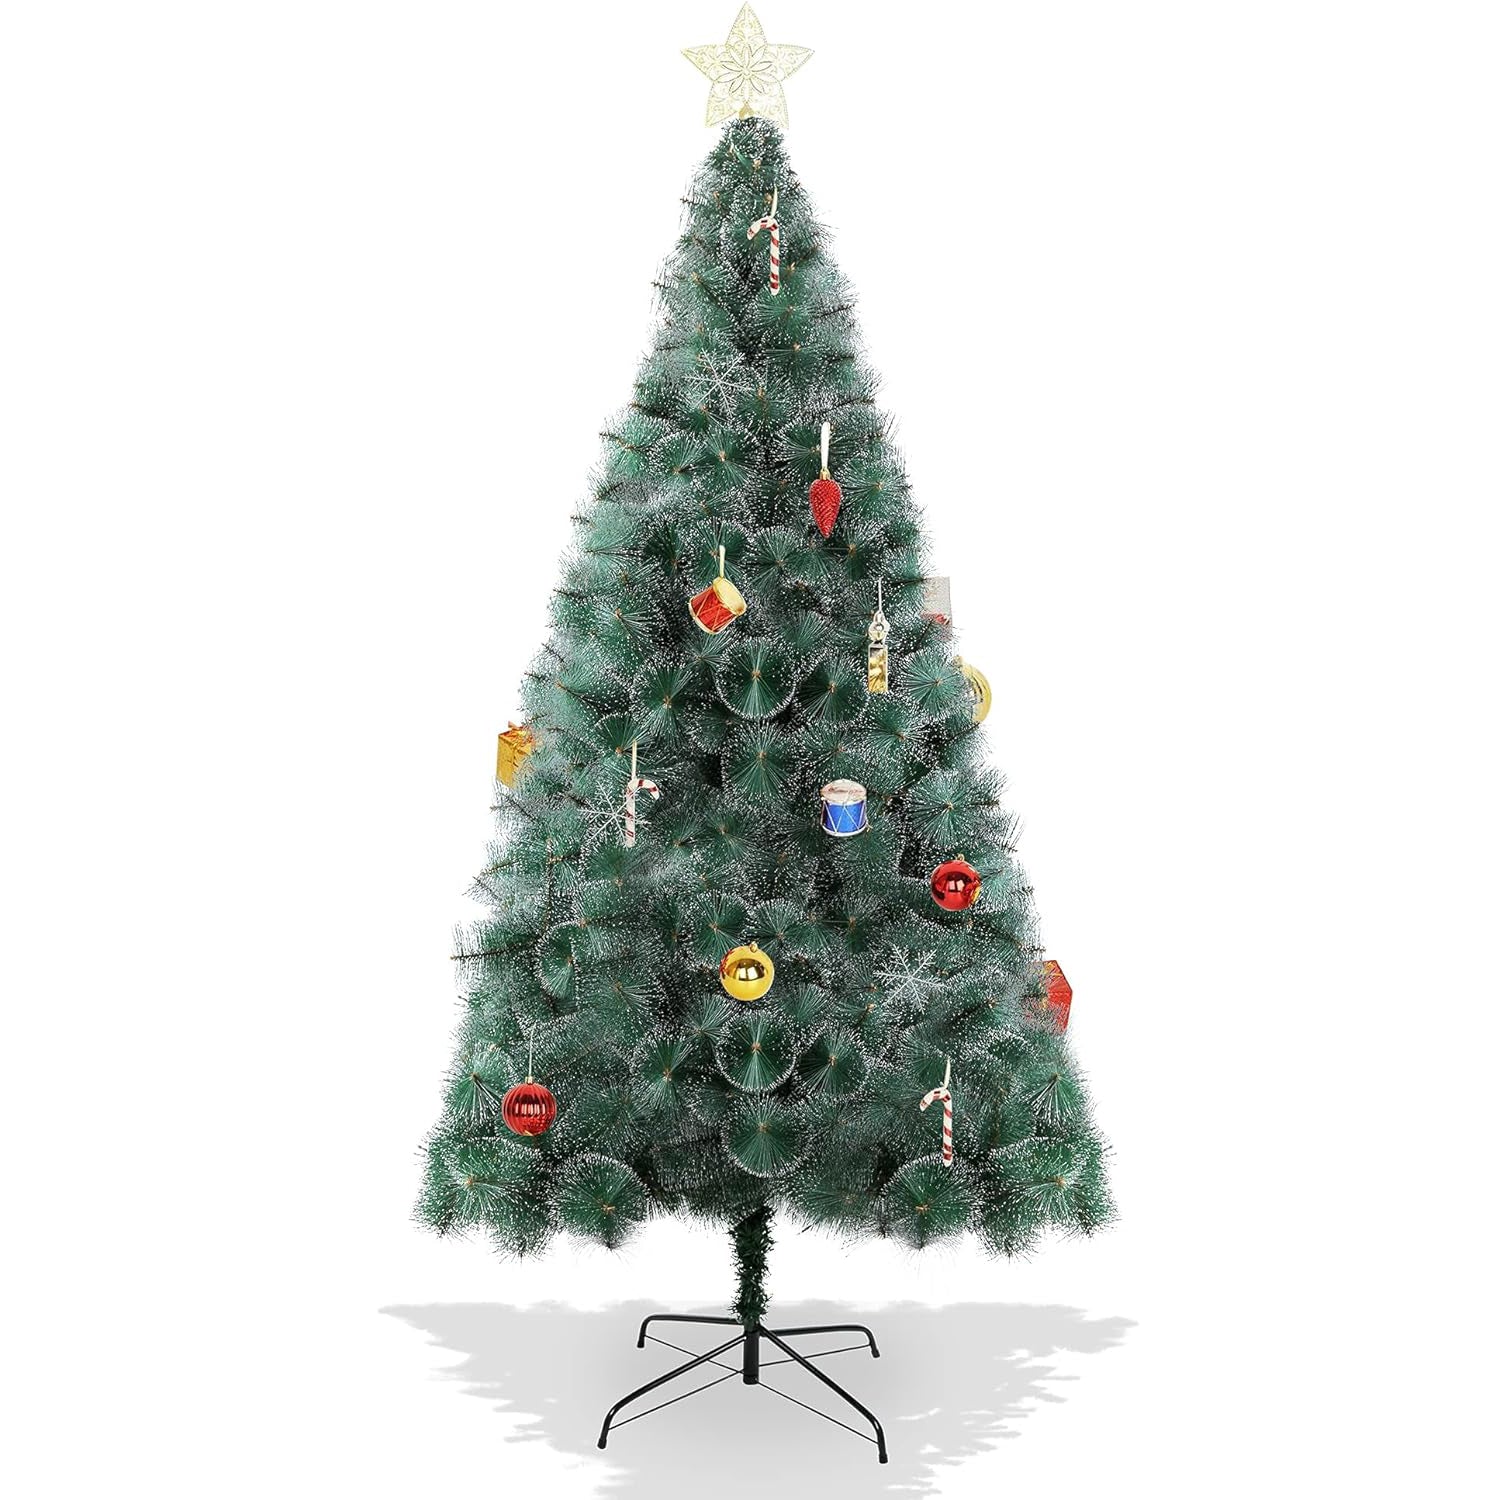 8ft Snow Flocked Christmas Tree Xmas Tree with 460 Branch Tips White Points and Decorations